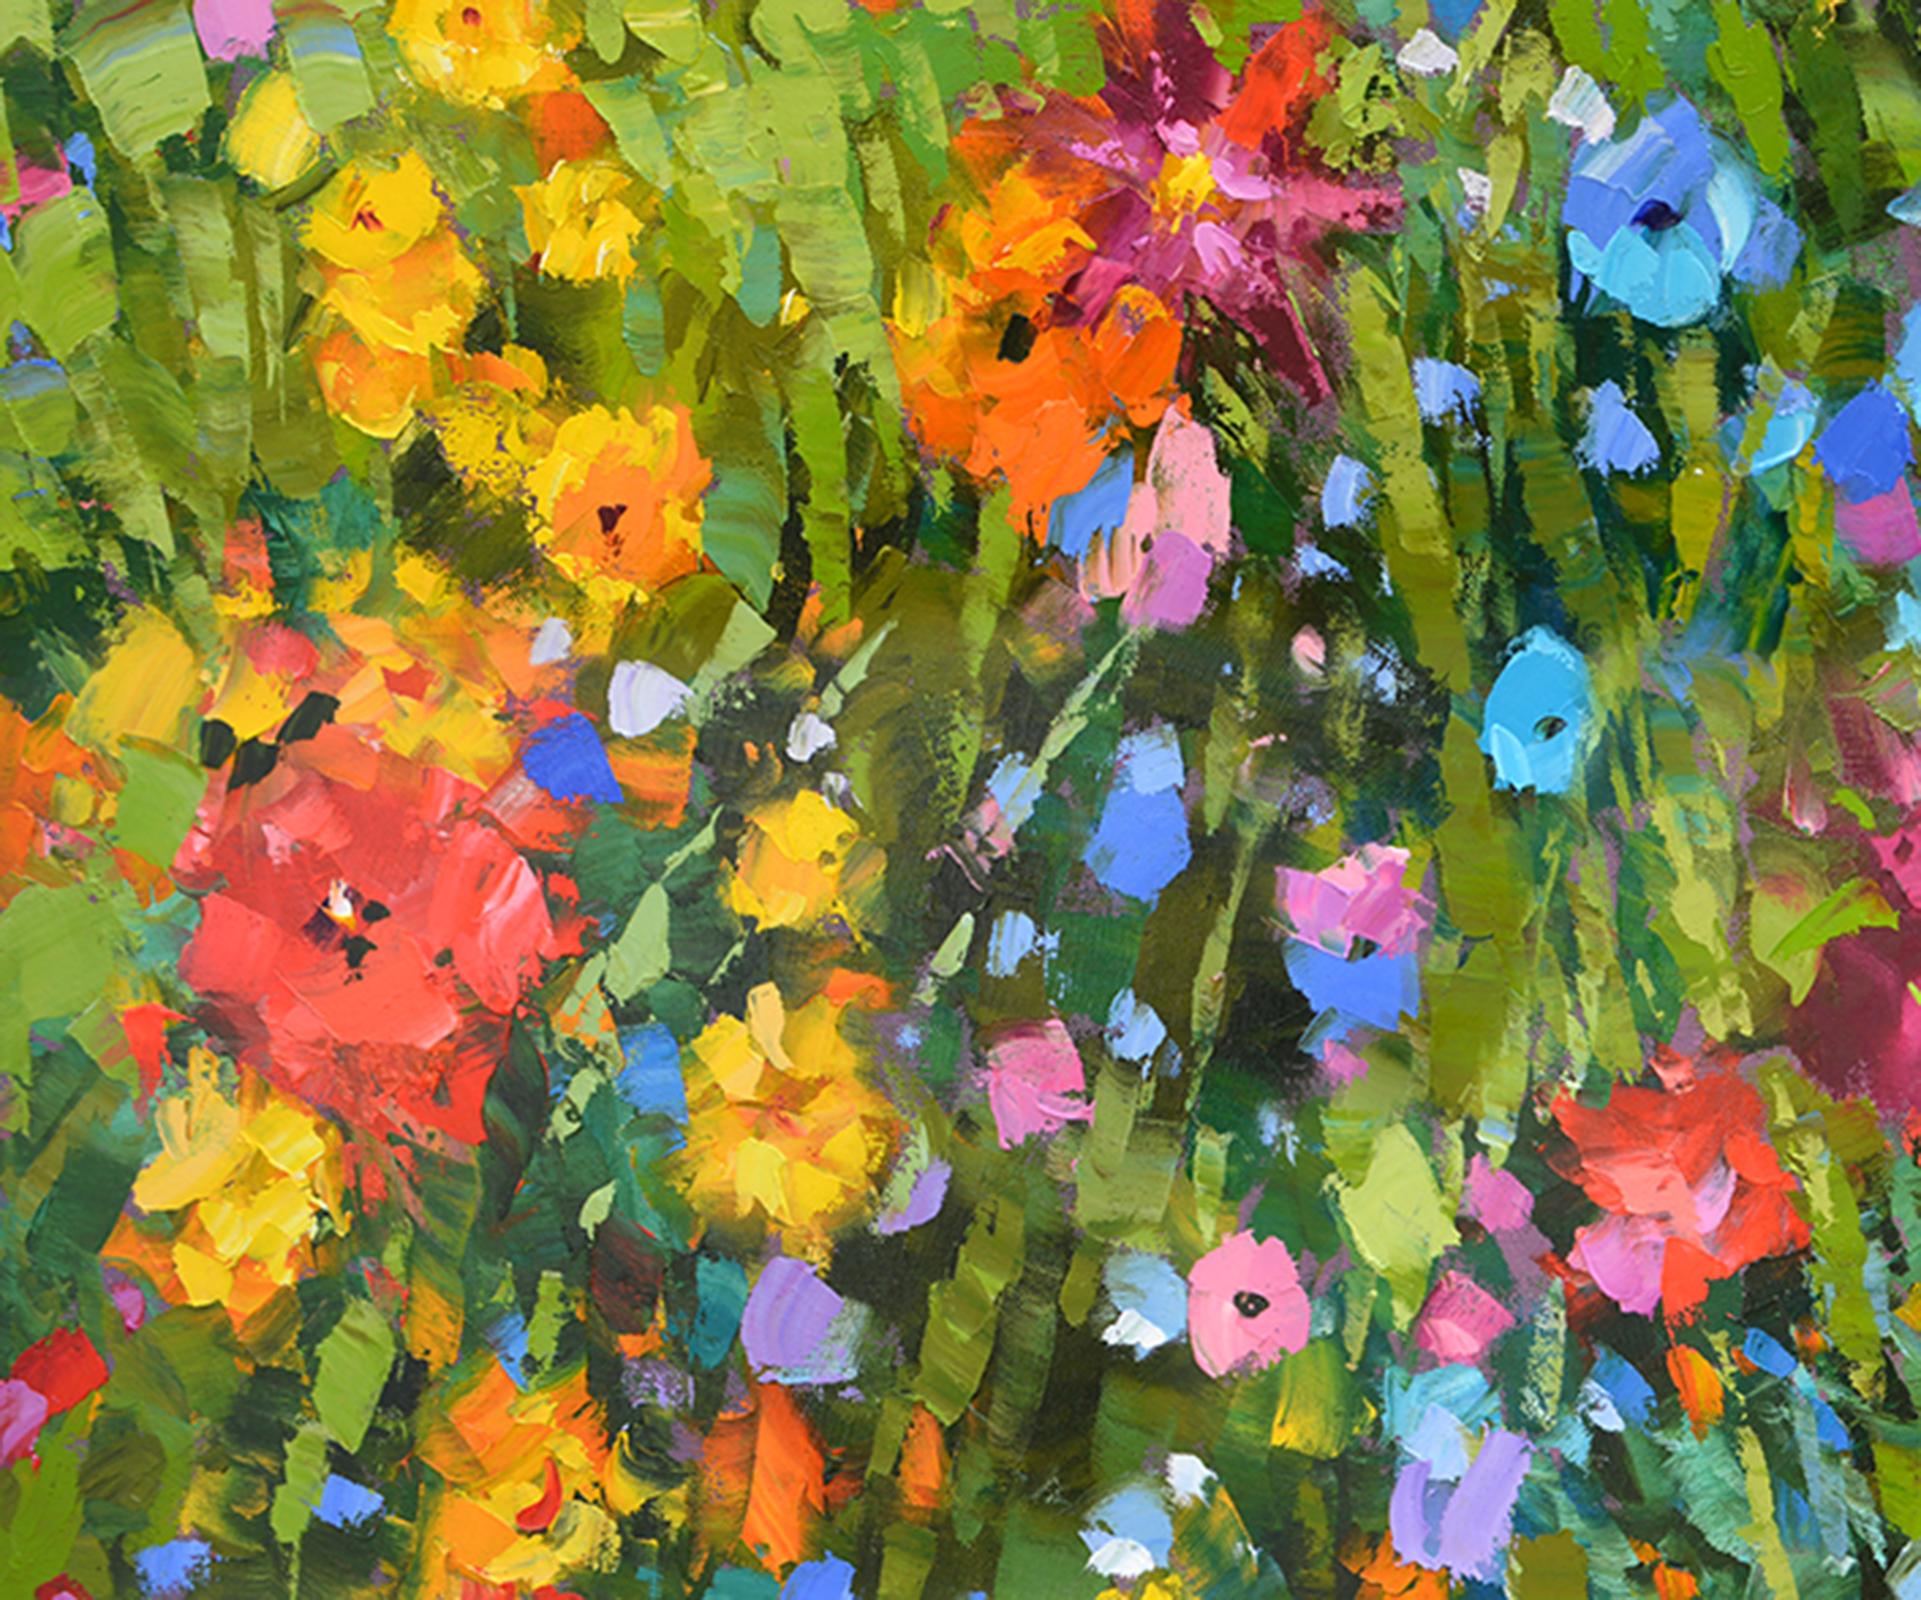 Flowery meadow 3 - oil, acrylic painting on canvas, large size, ready to hang

size: 39,5